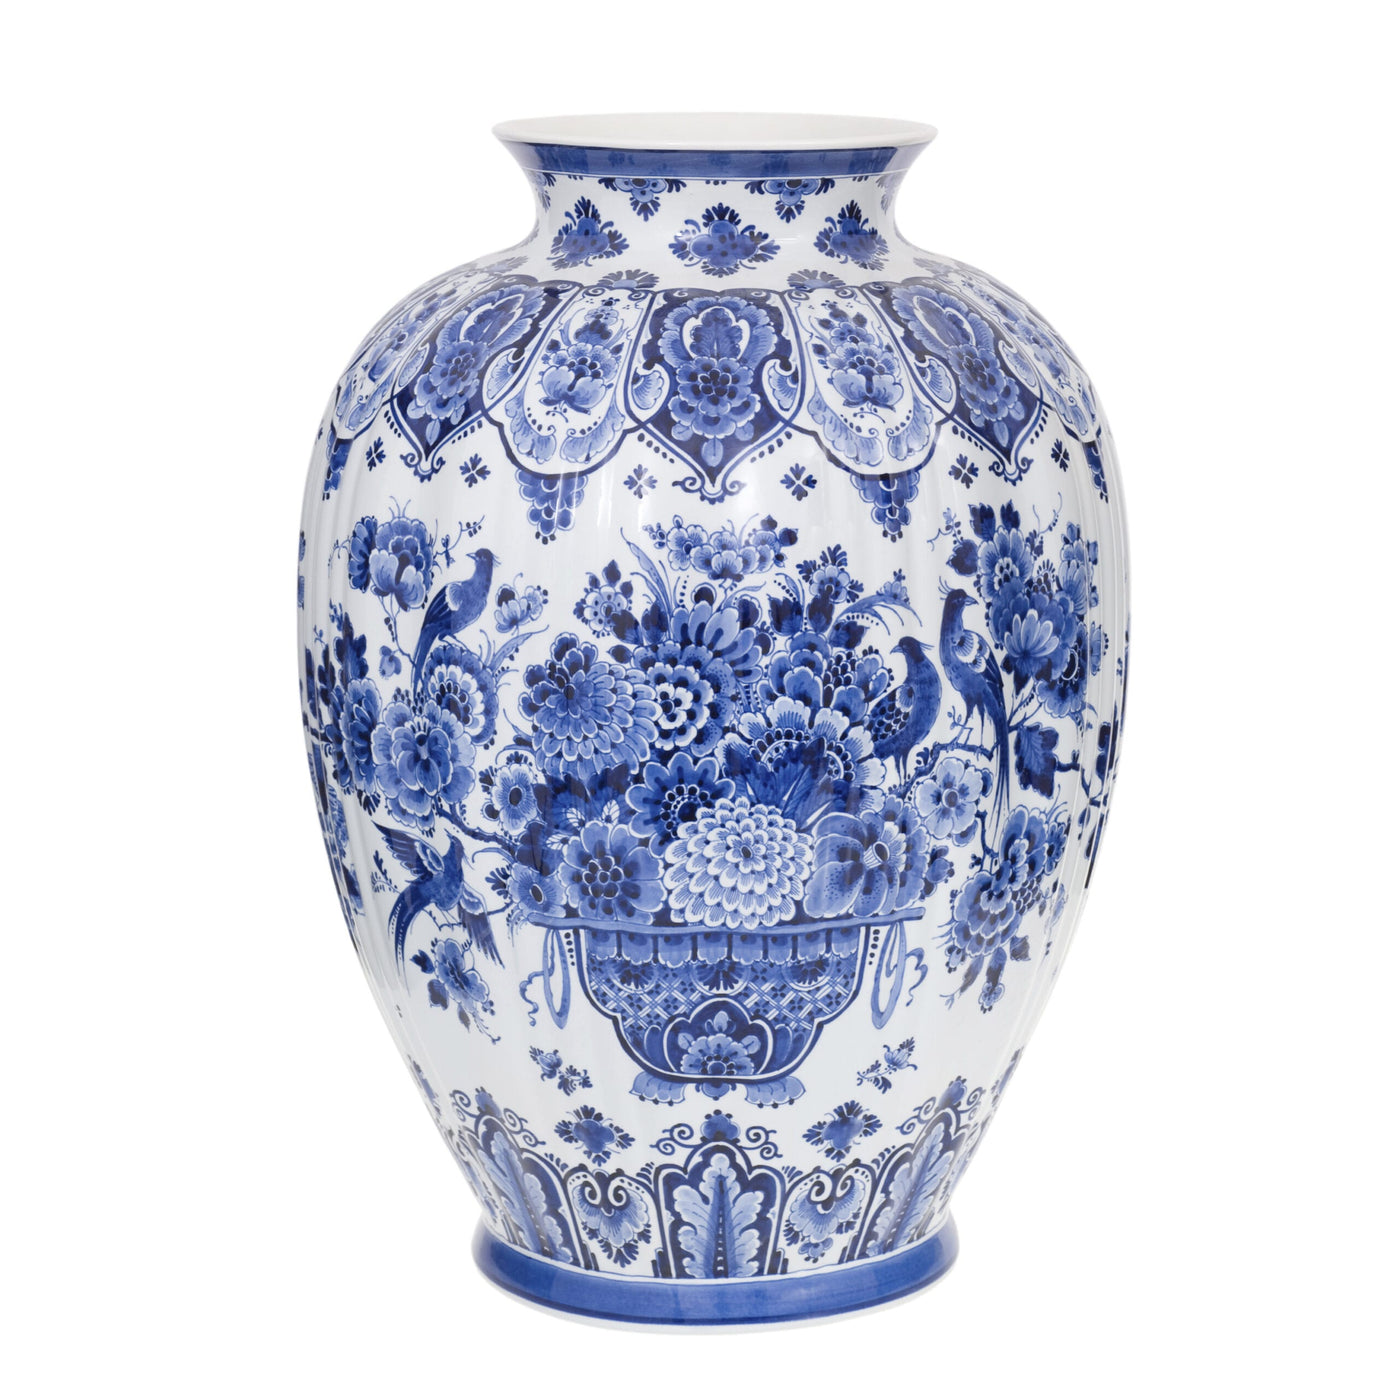 Iconic Vase Hand-Painted by Royal Delft